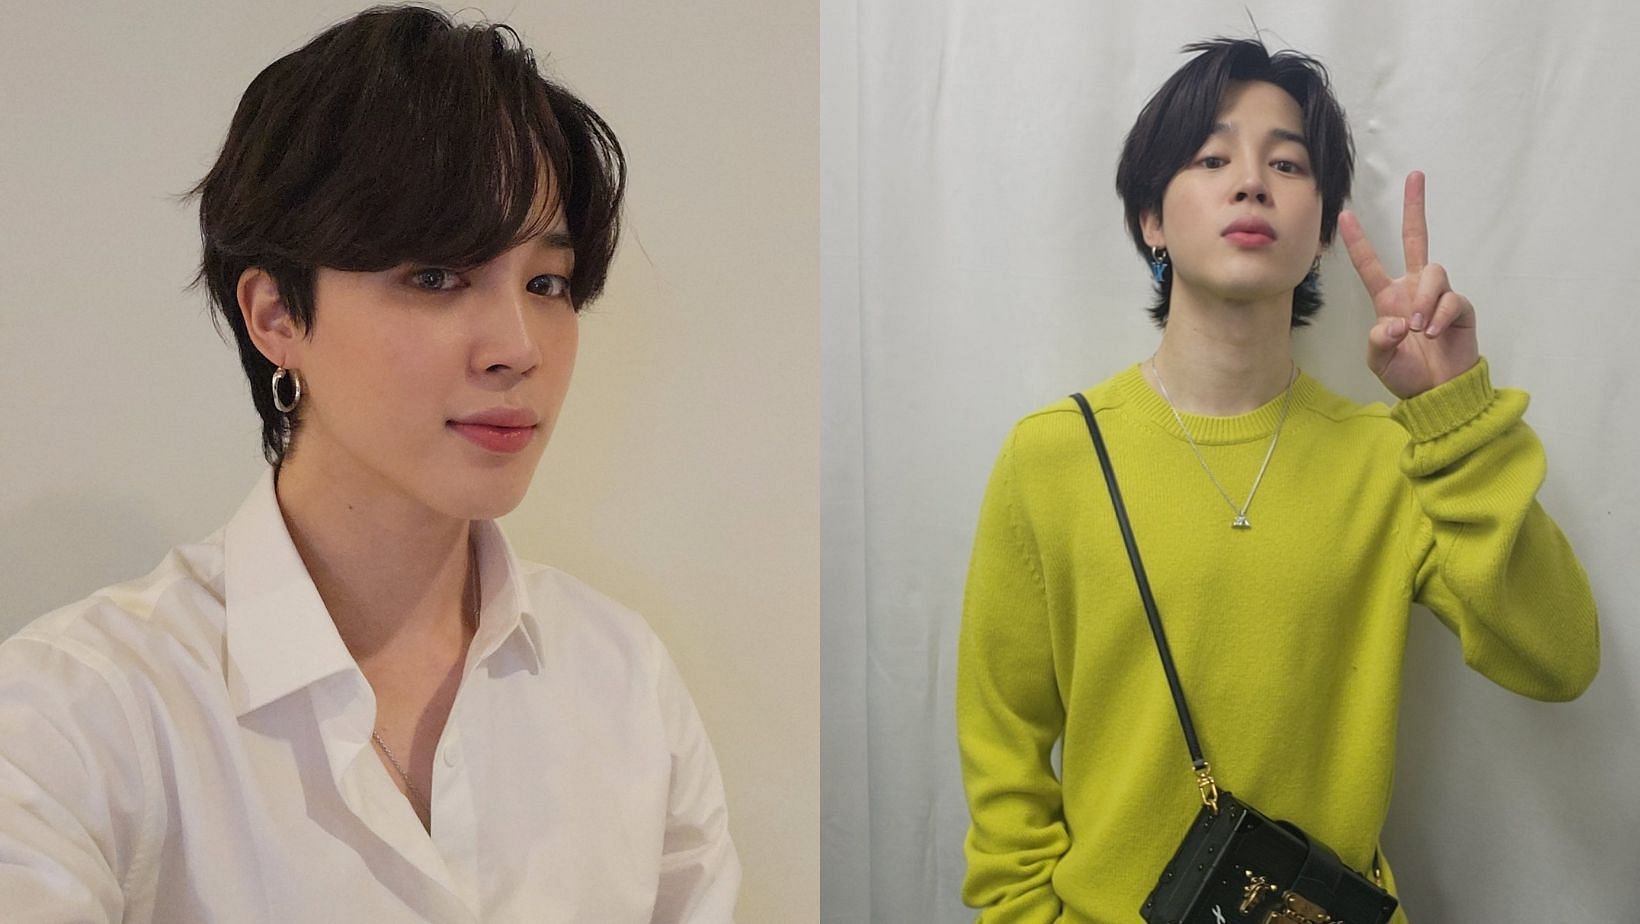 BTS&rsquo; Jimin donated for scholarships to the Department of Physical Therapy at Dongeui Science University. (Images via X/@BTS_twt)